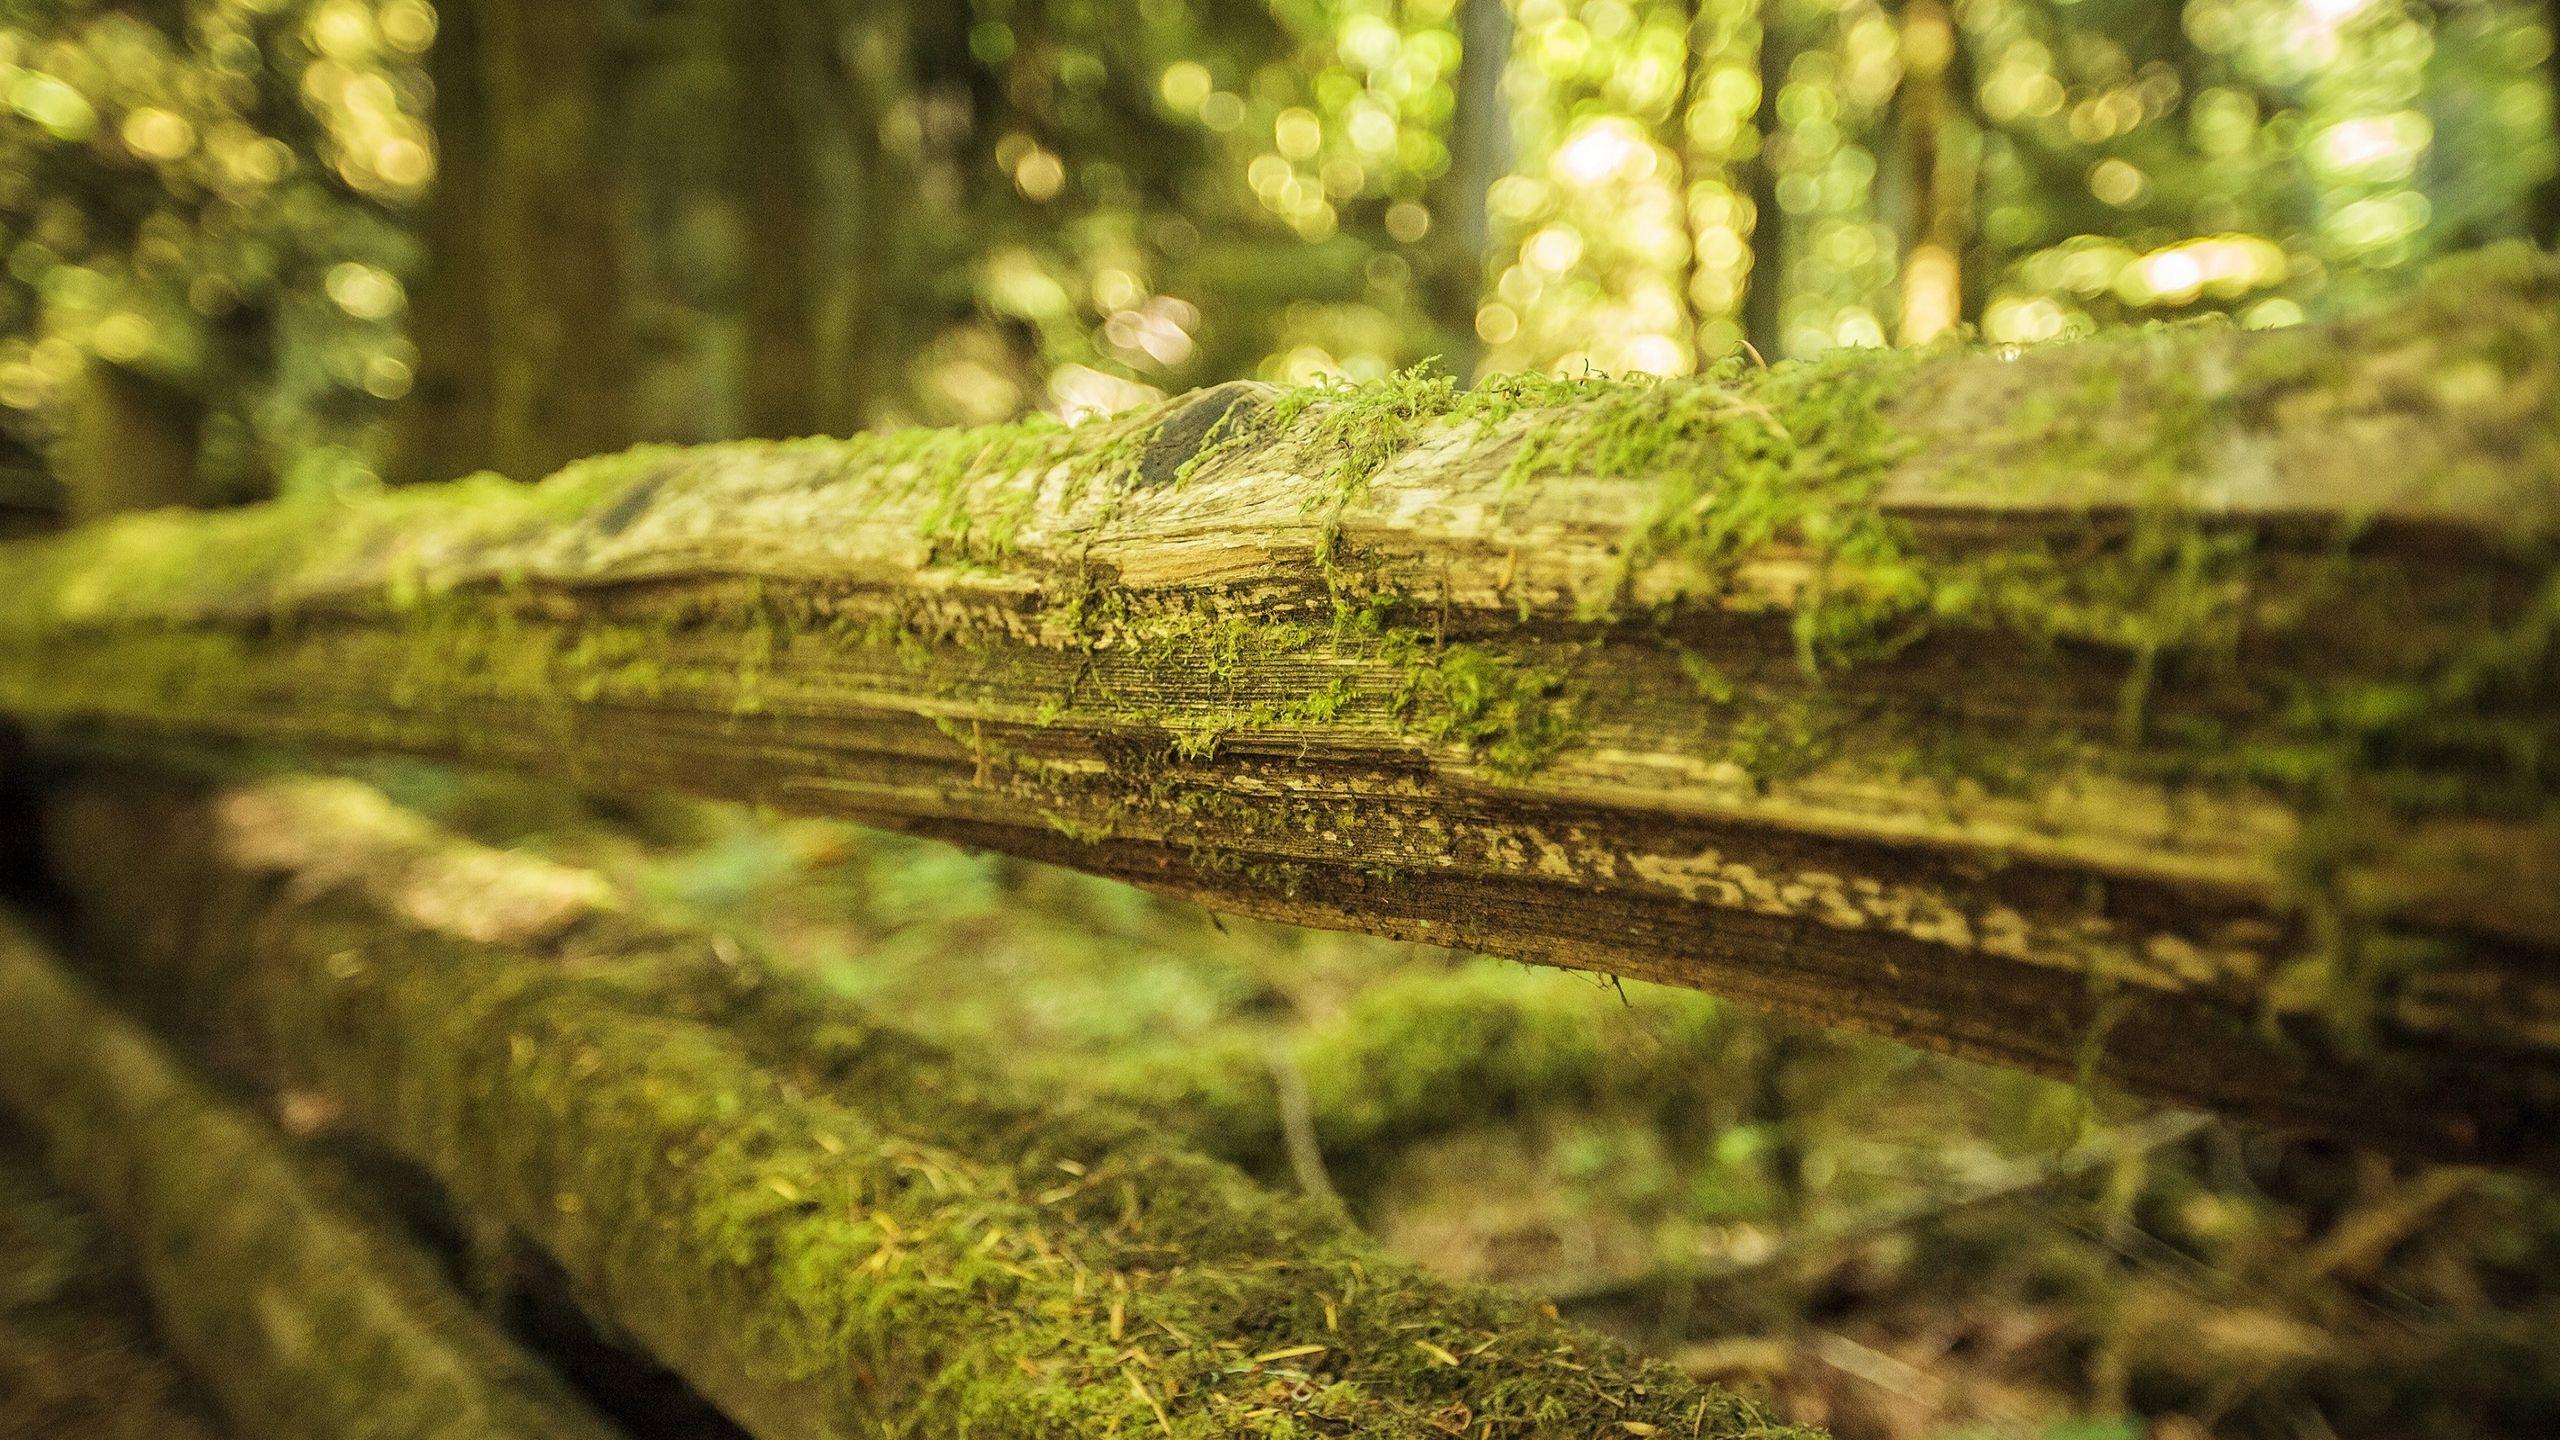 Moss On Wood Wallpaper Background 49474 2560x1440 px